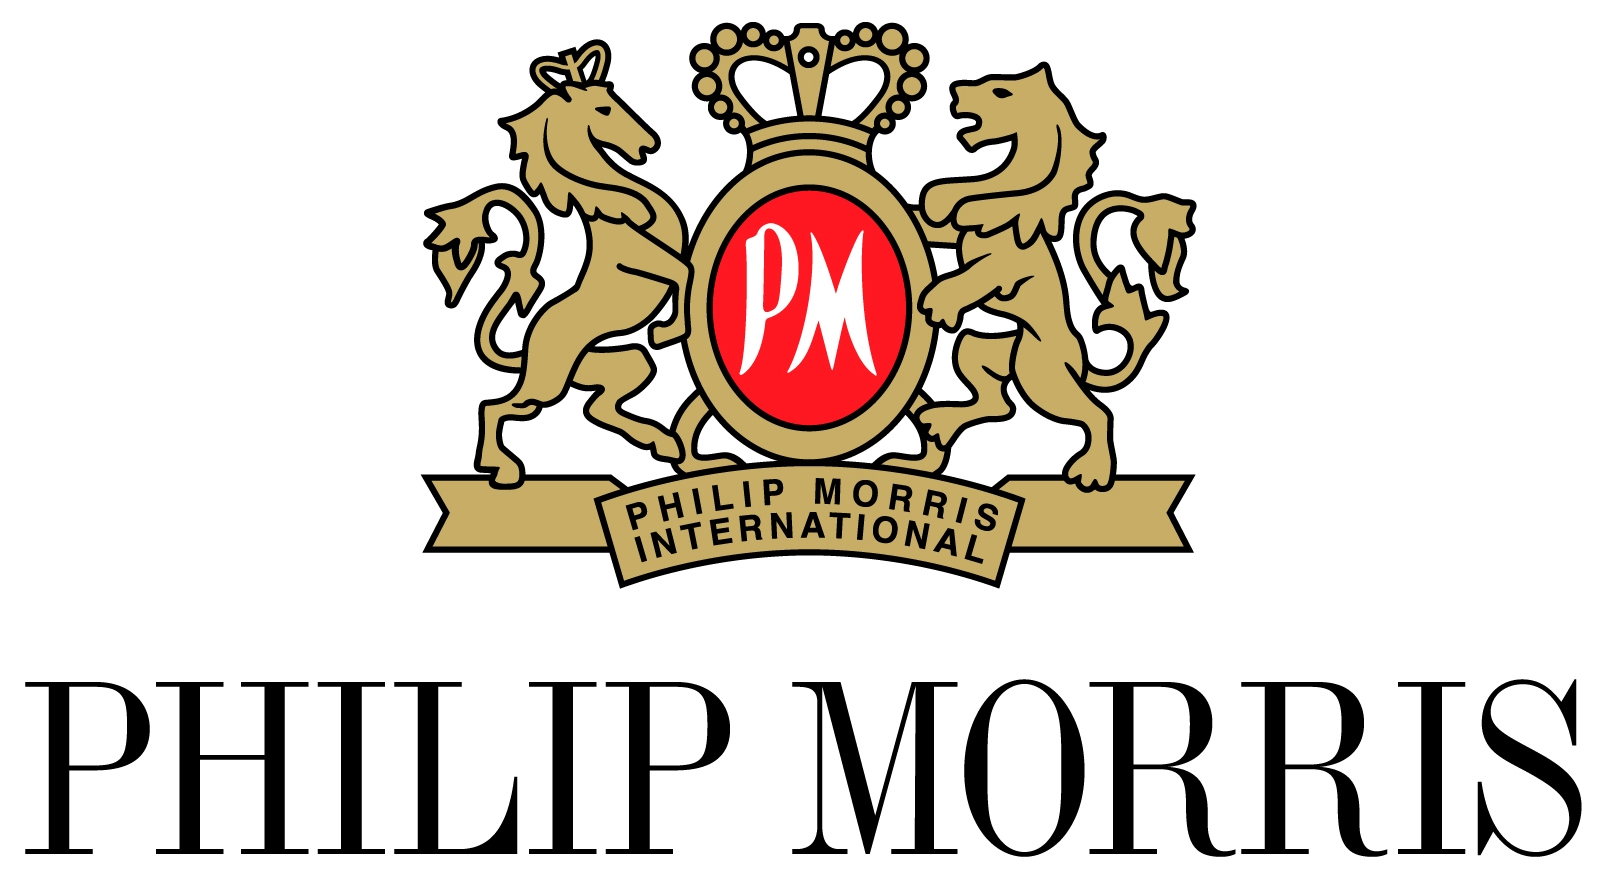 More about PHILIP MORRIS